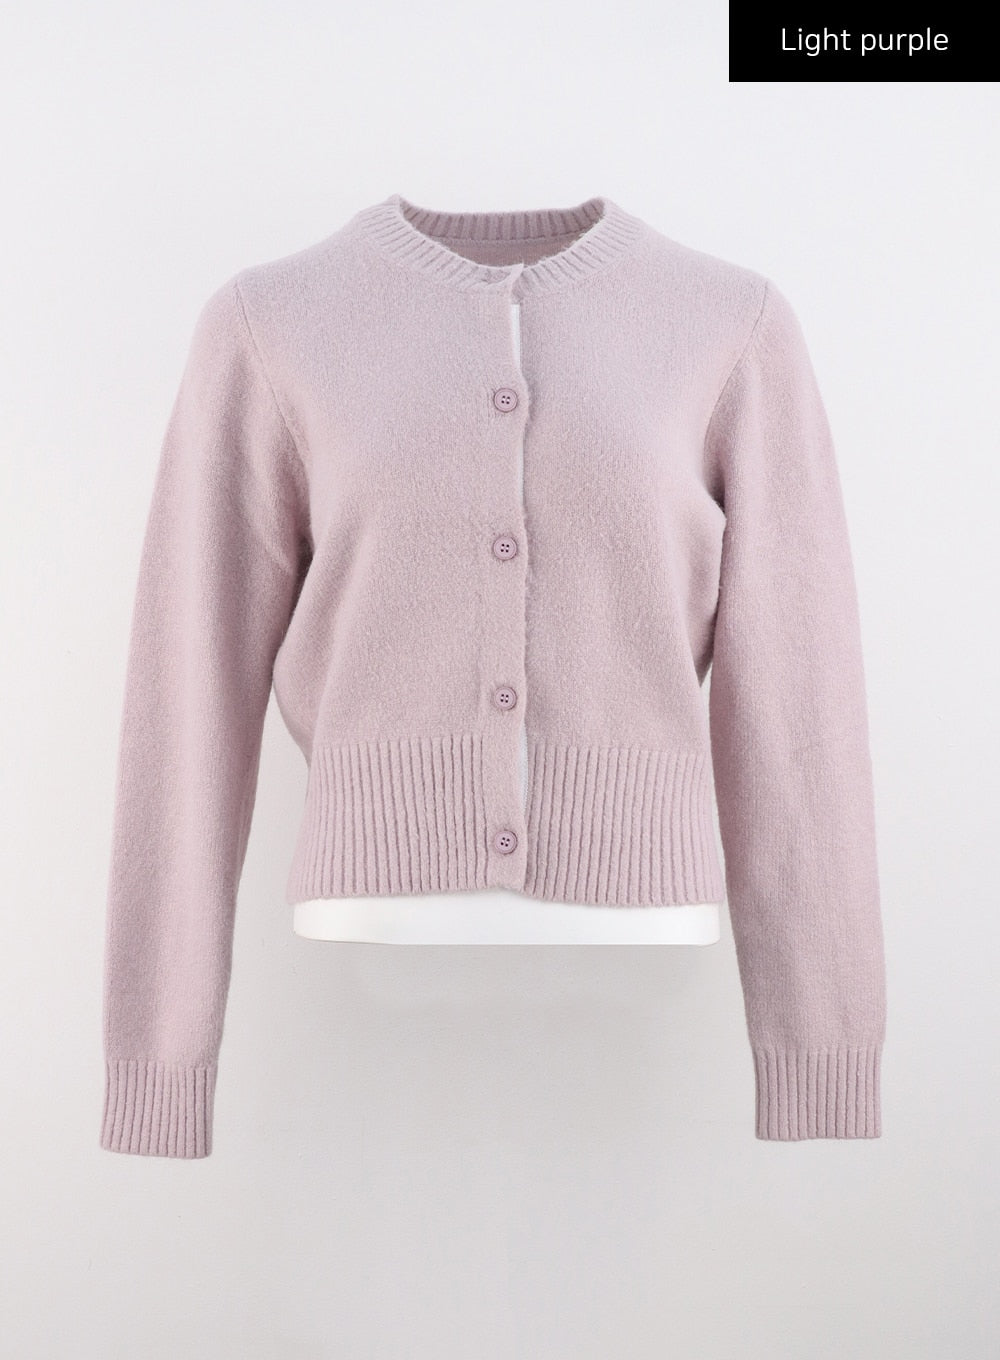 Cropped Cozy-Knit Cardigan for Women